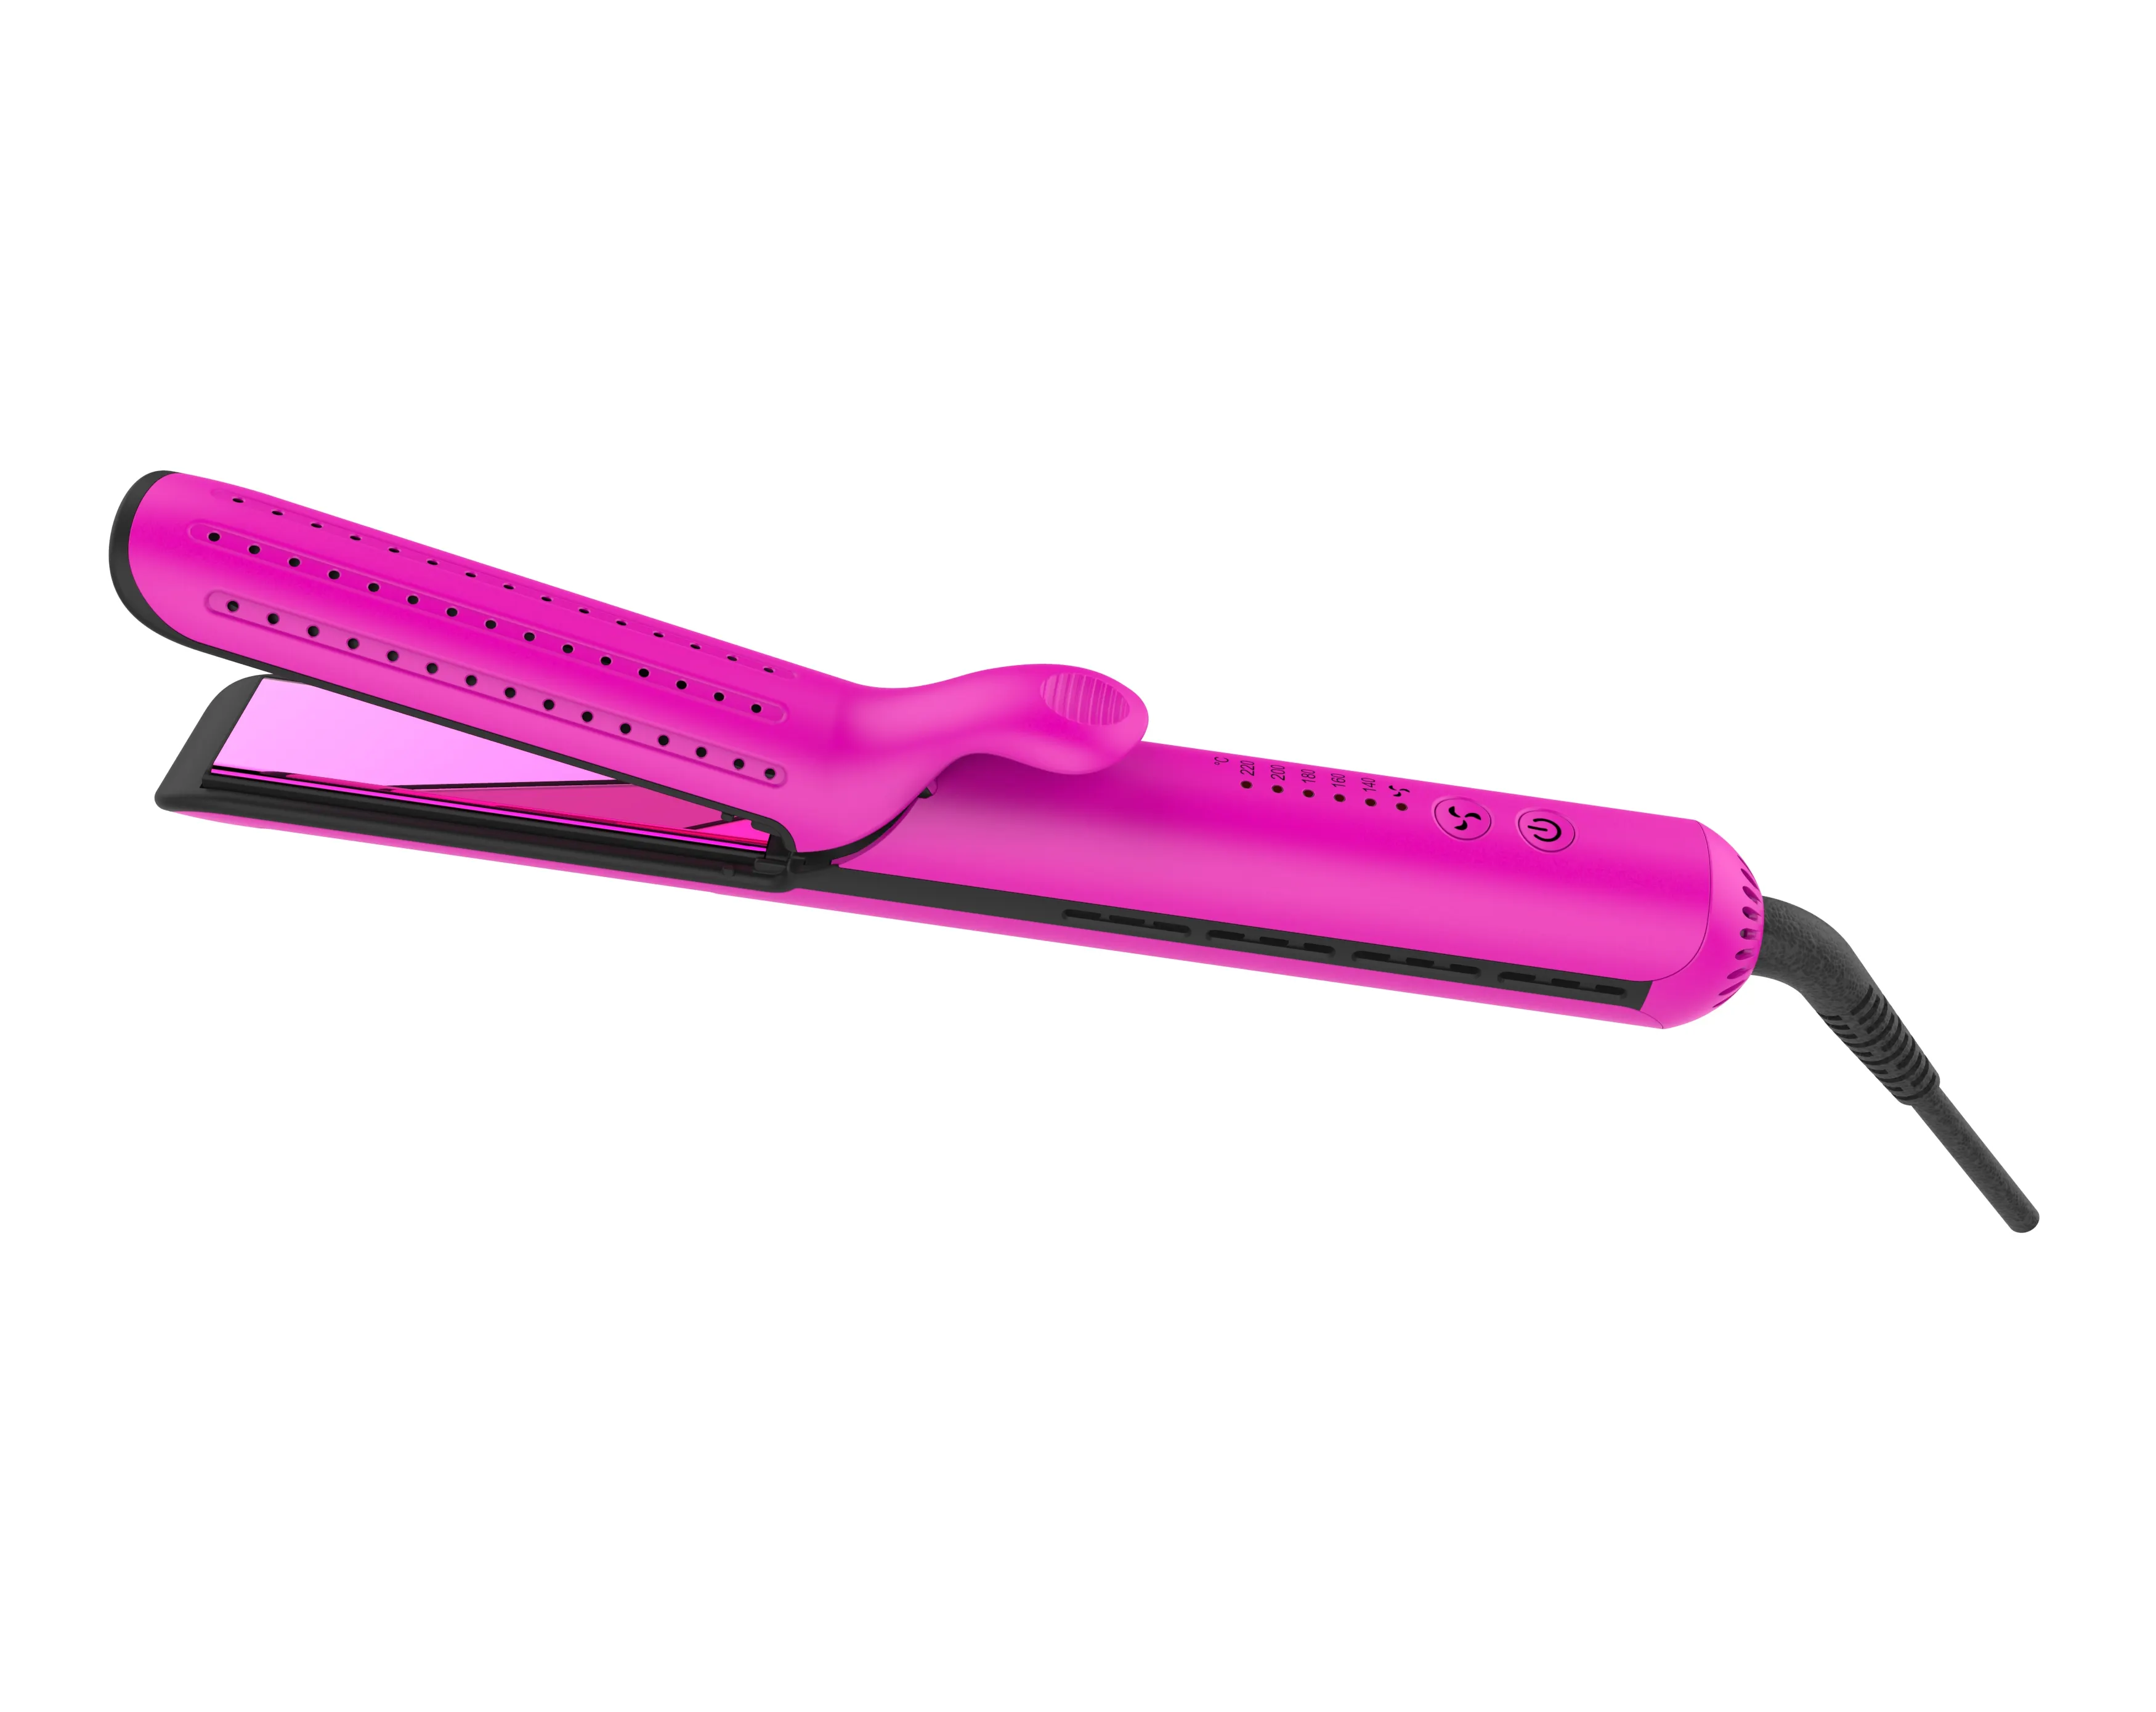 instantly cool 2 in 1 360 Angle Airflow Styler Iron